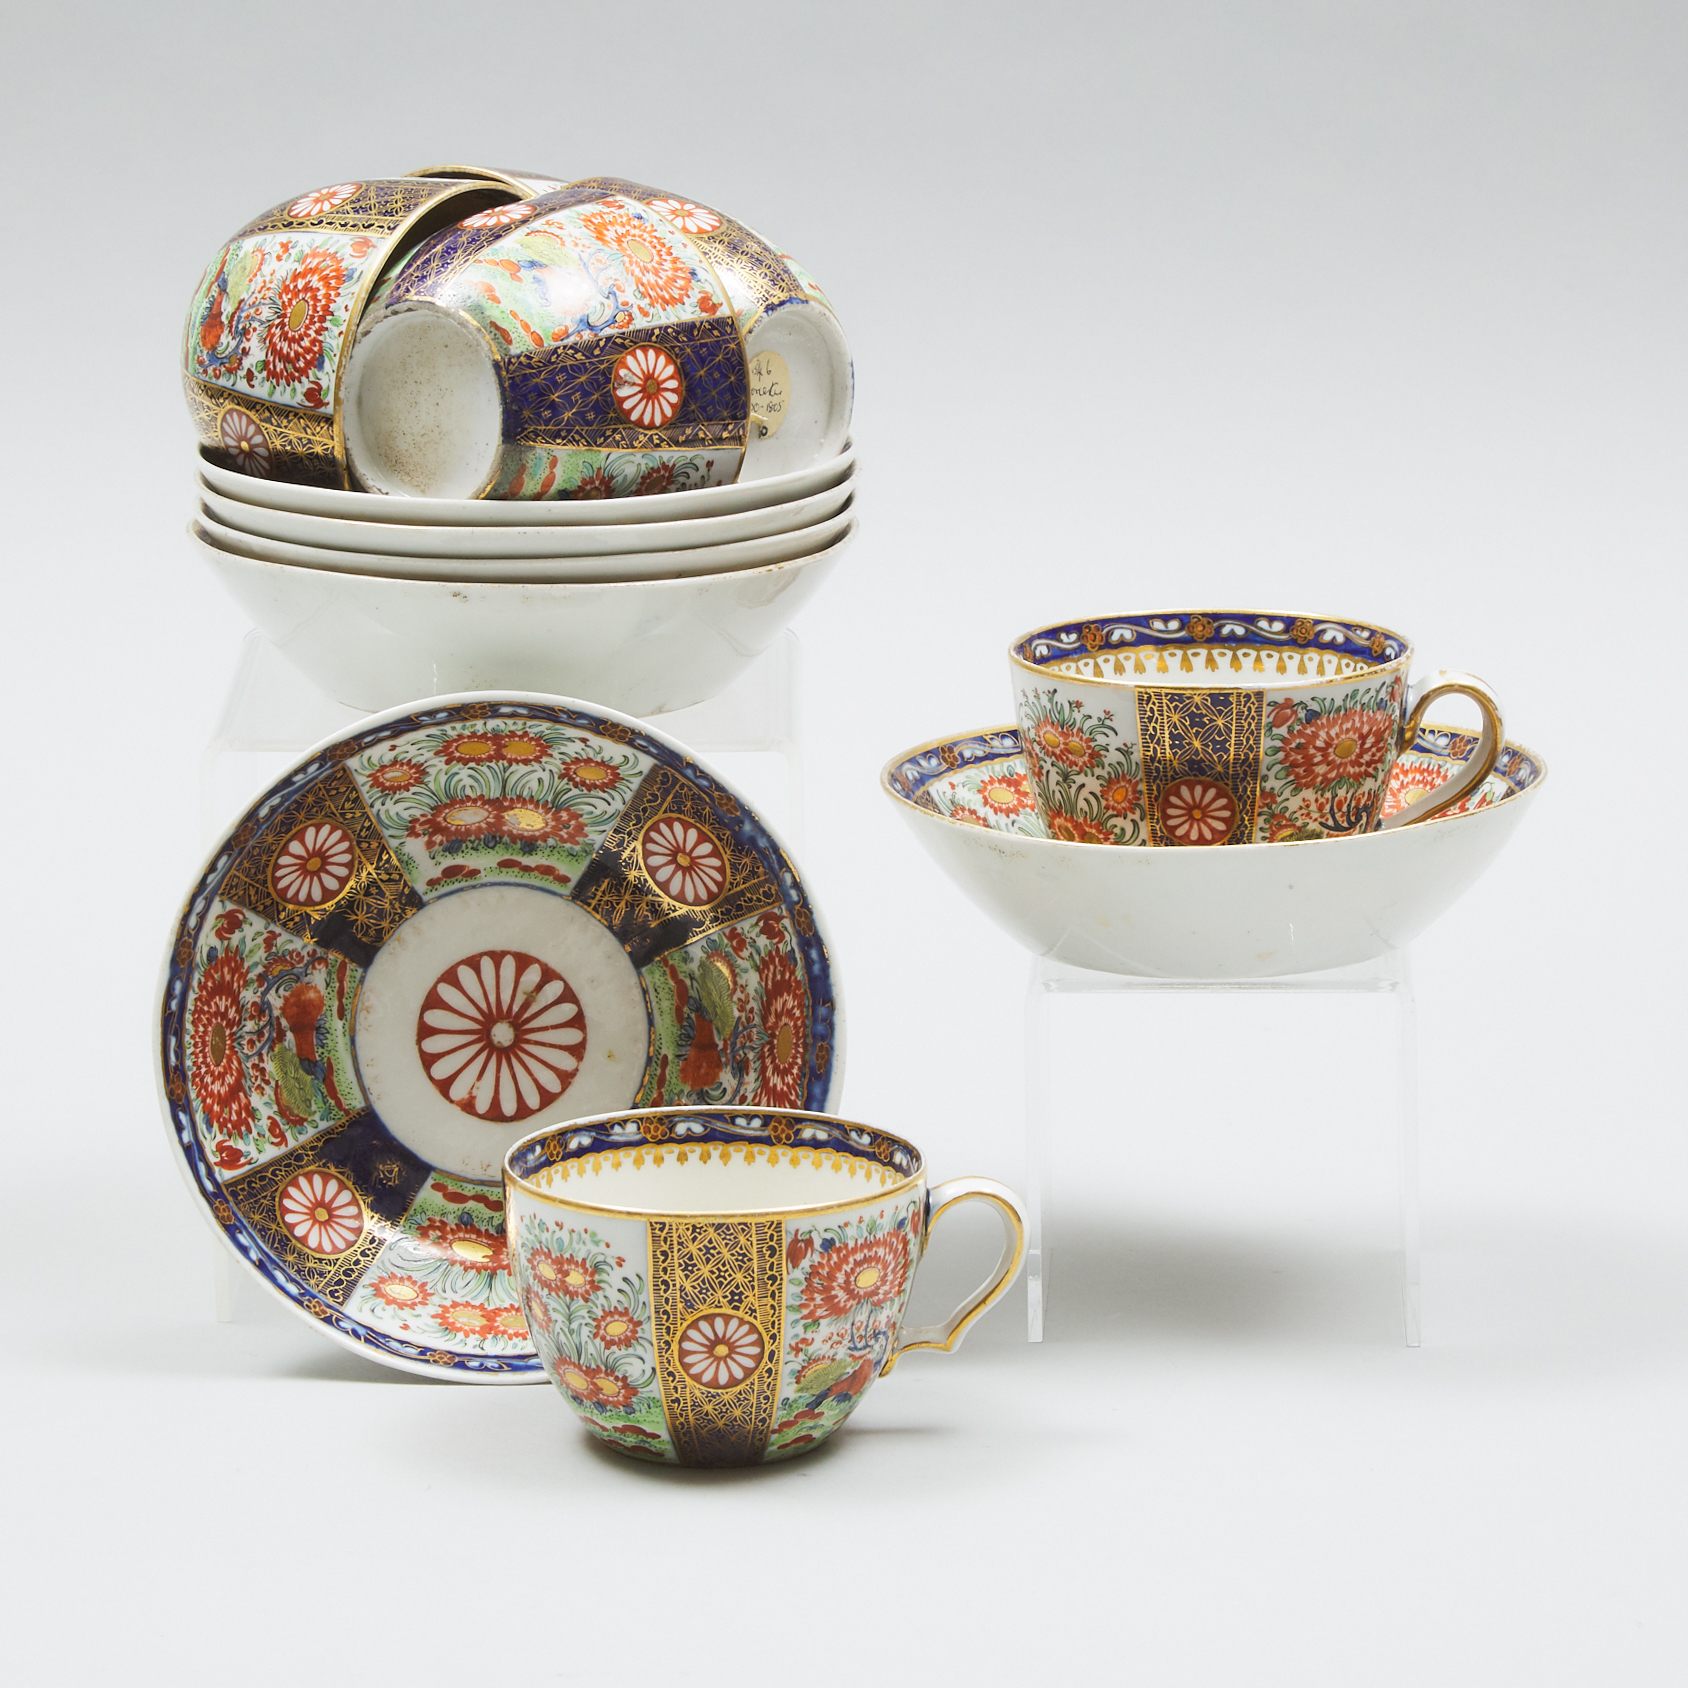 Six Chamberlains Worcester Japan Pattern Tea Cups and Saucers, early 19th century